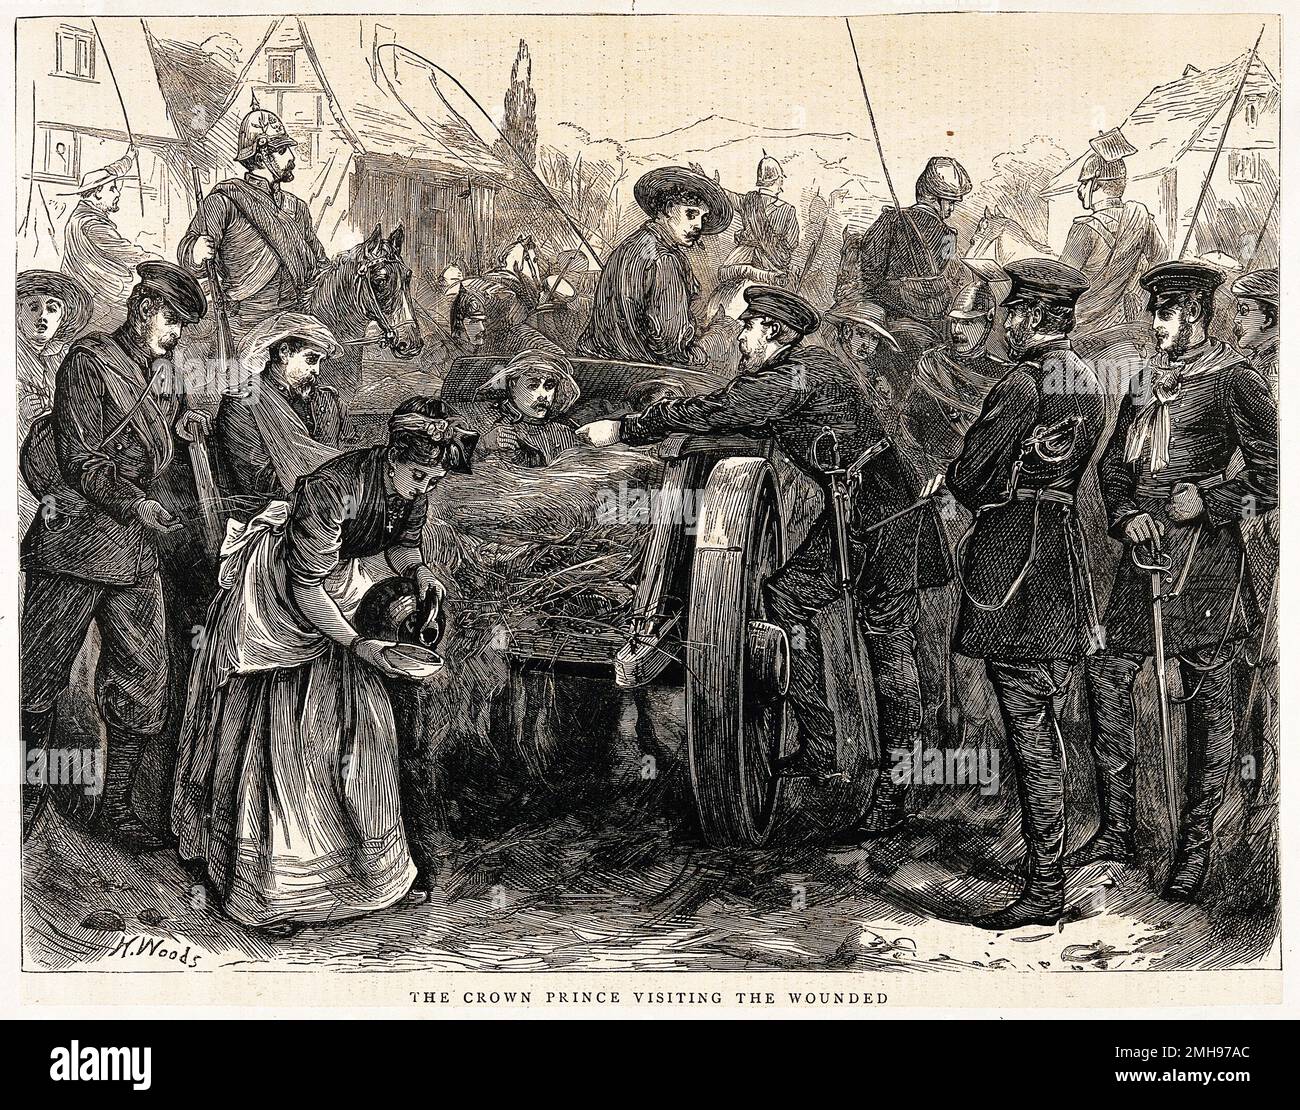 the Crown Prince visiting the wounded near the battlefront during the Franco-Prussian War. Wood engraving by H. Woods. Stock Photo